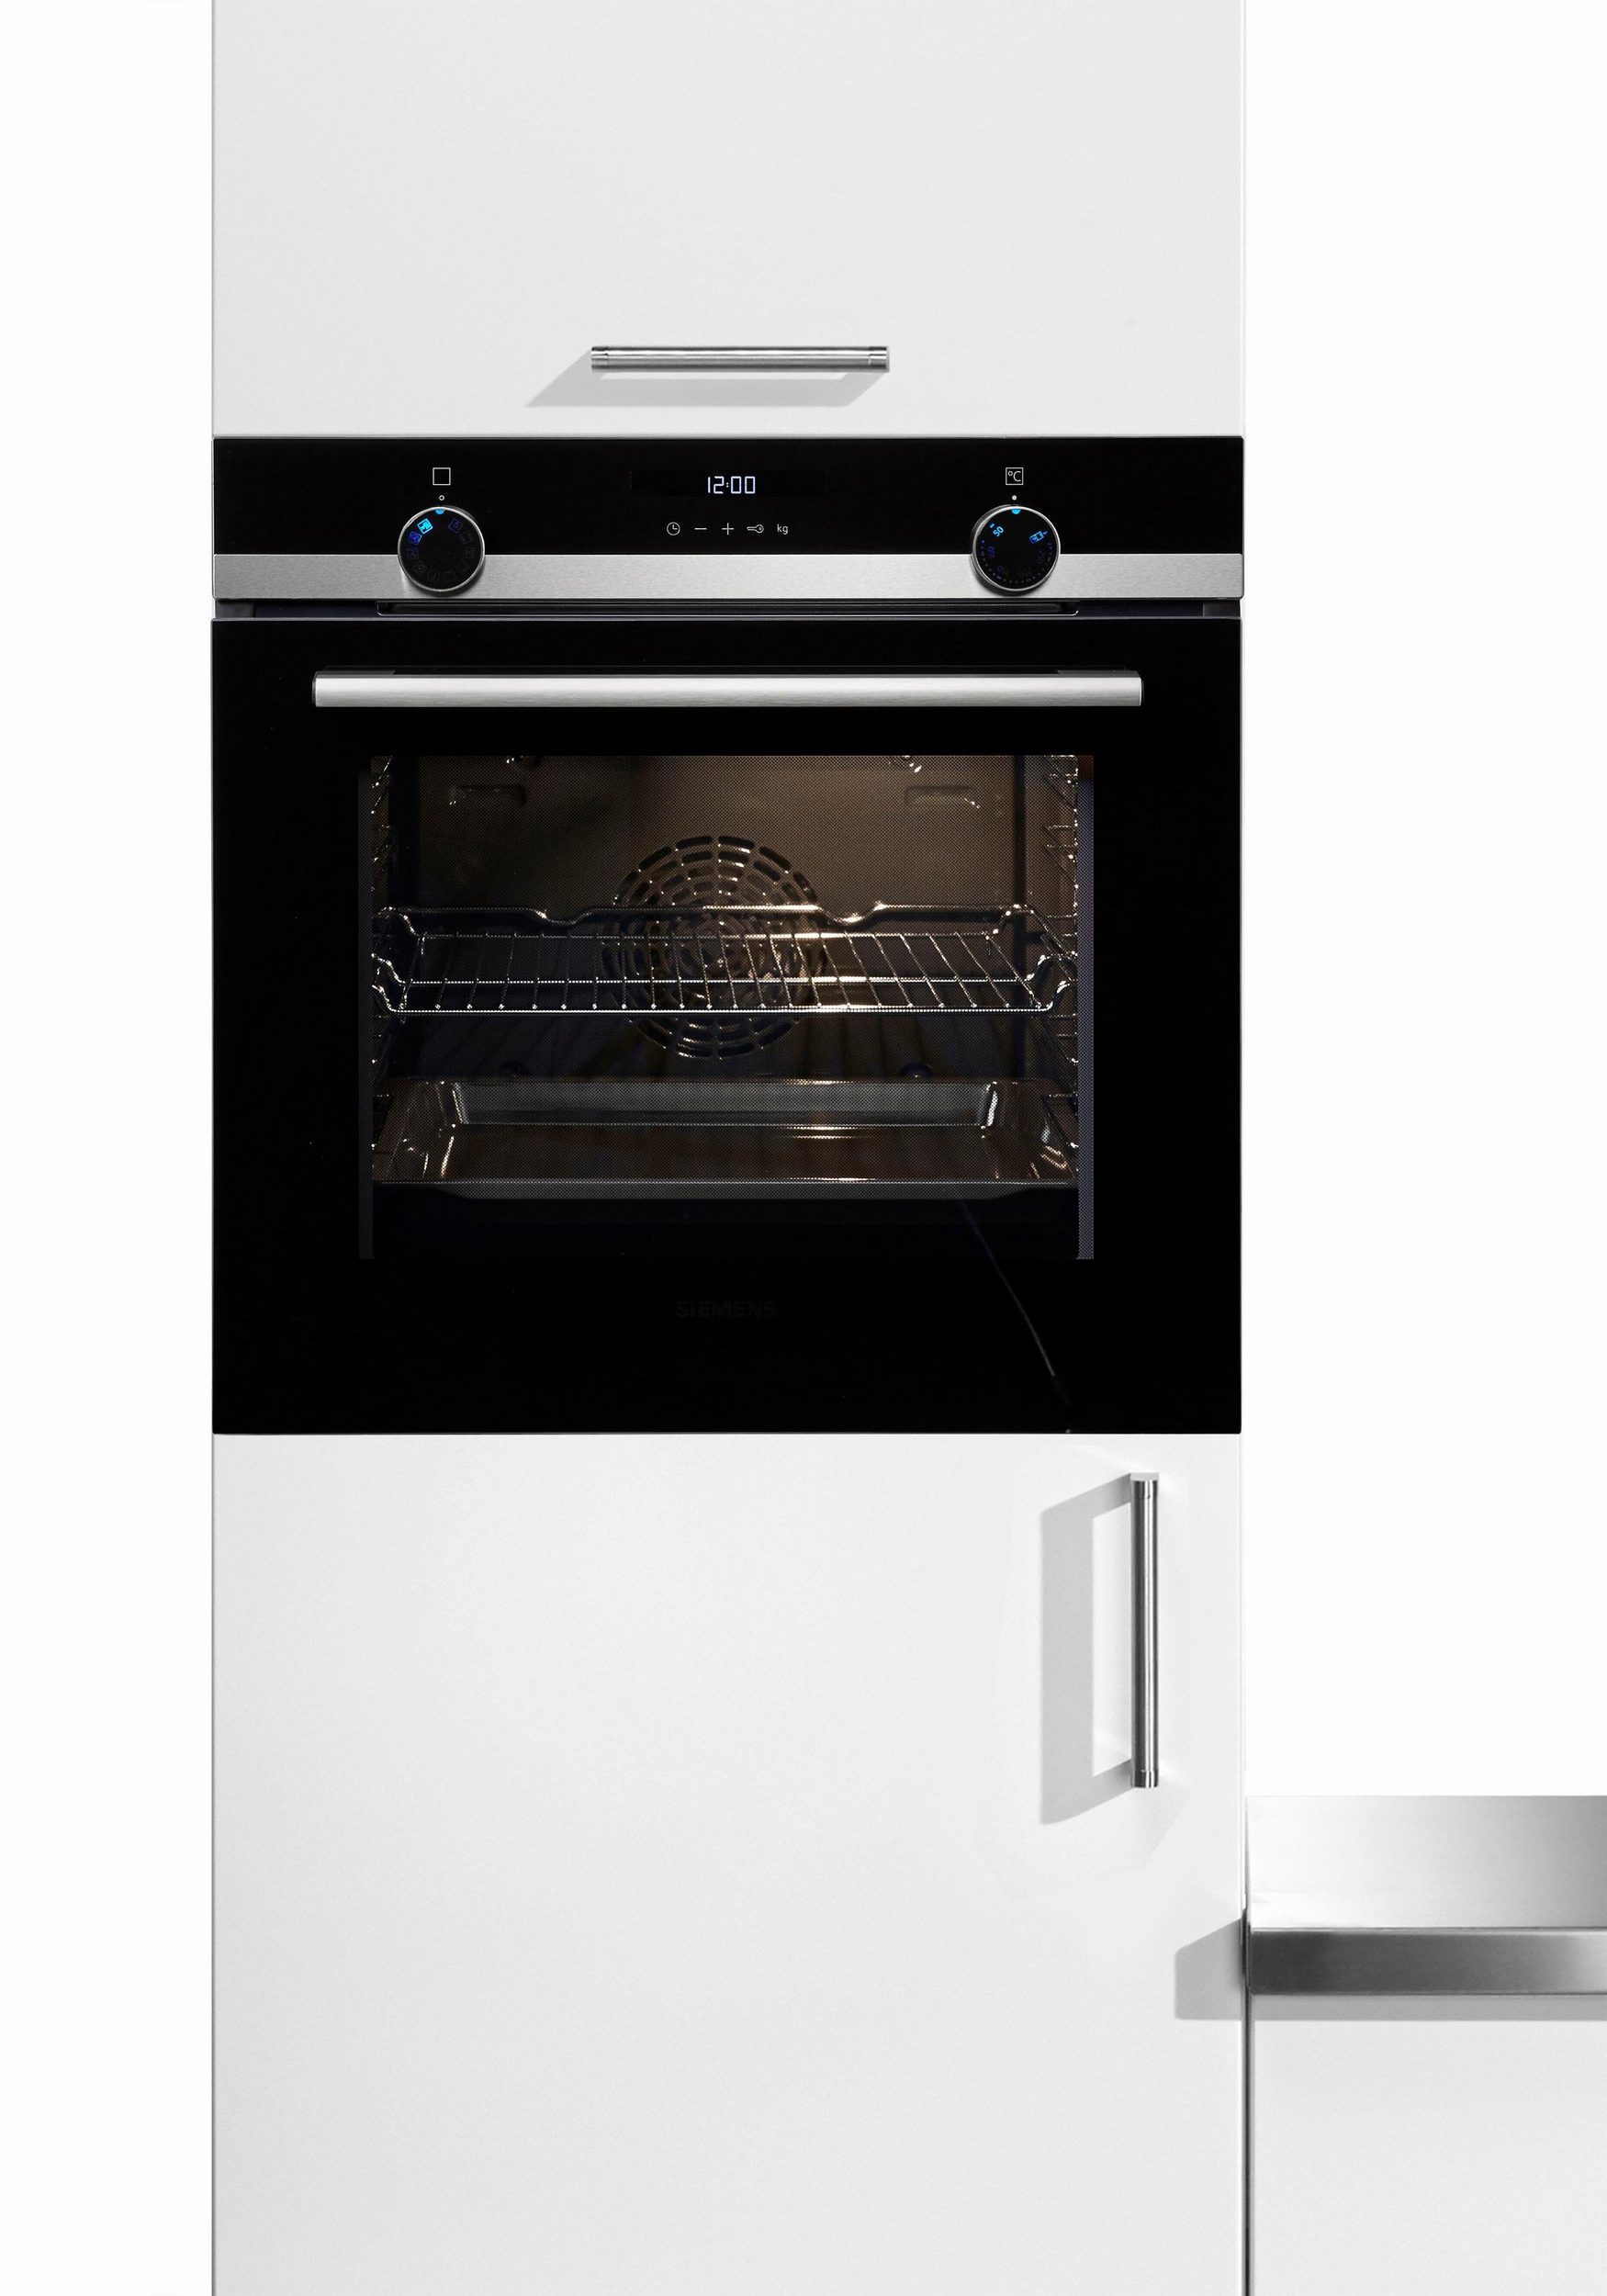 Siemens built-in oven HB517ABS0 (built-in device, 71 liters, 594 mm wide), iQ500 4242003799192